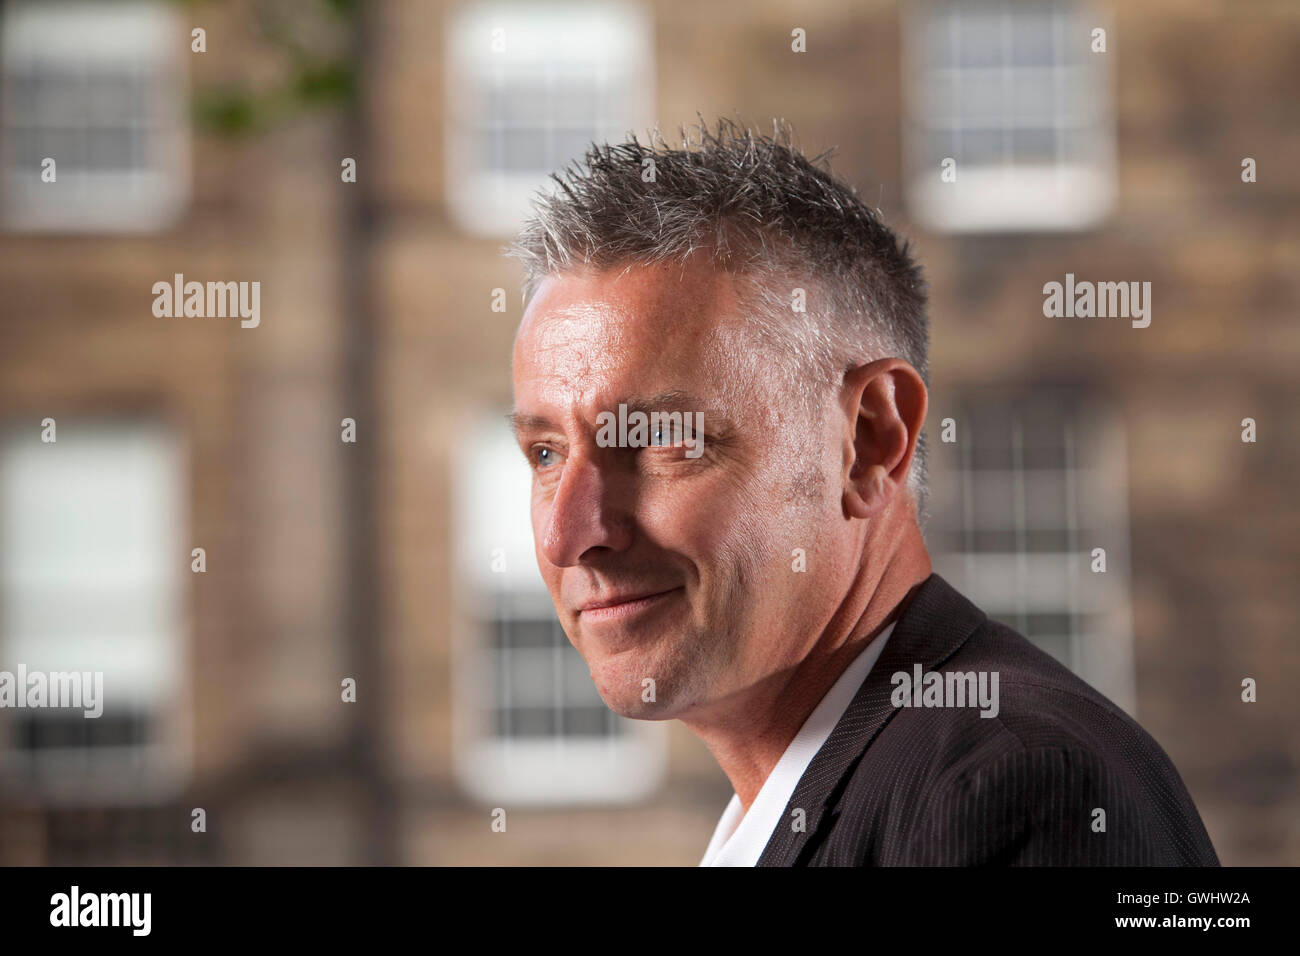 David F. Ross, the Scottish architect by day, and a social media commentator and author, at the Edinburgh International Book Festival. Edinburgh, Scotland. 29th August 2016 Stock Photo